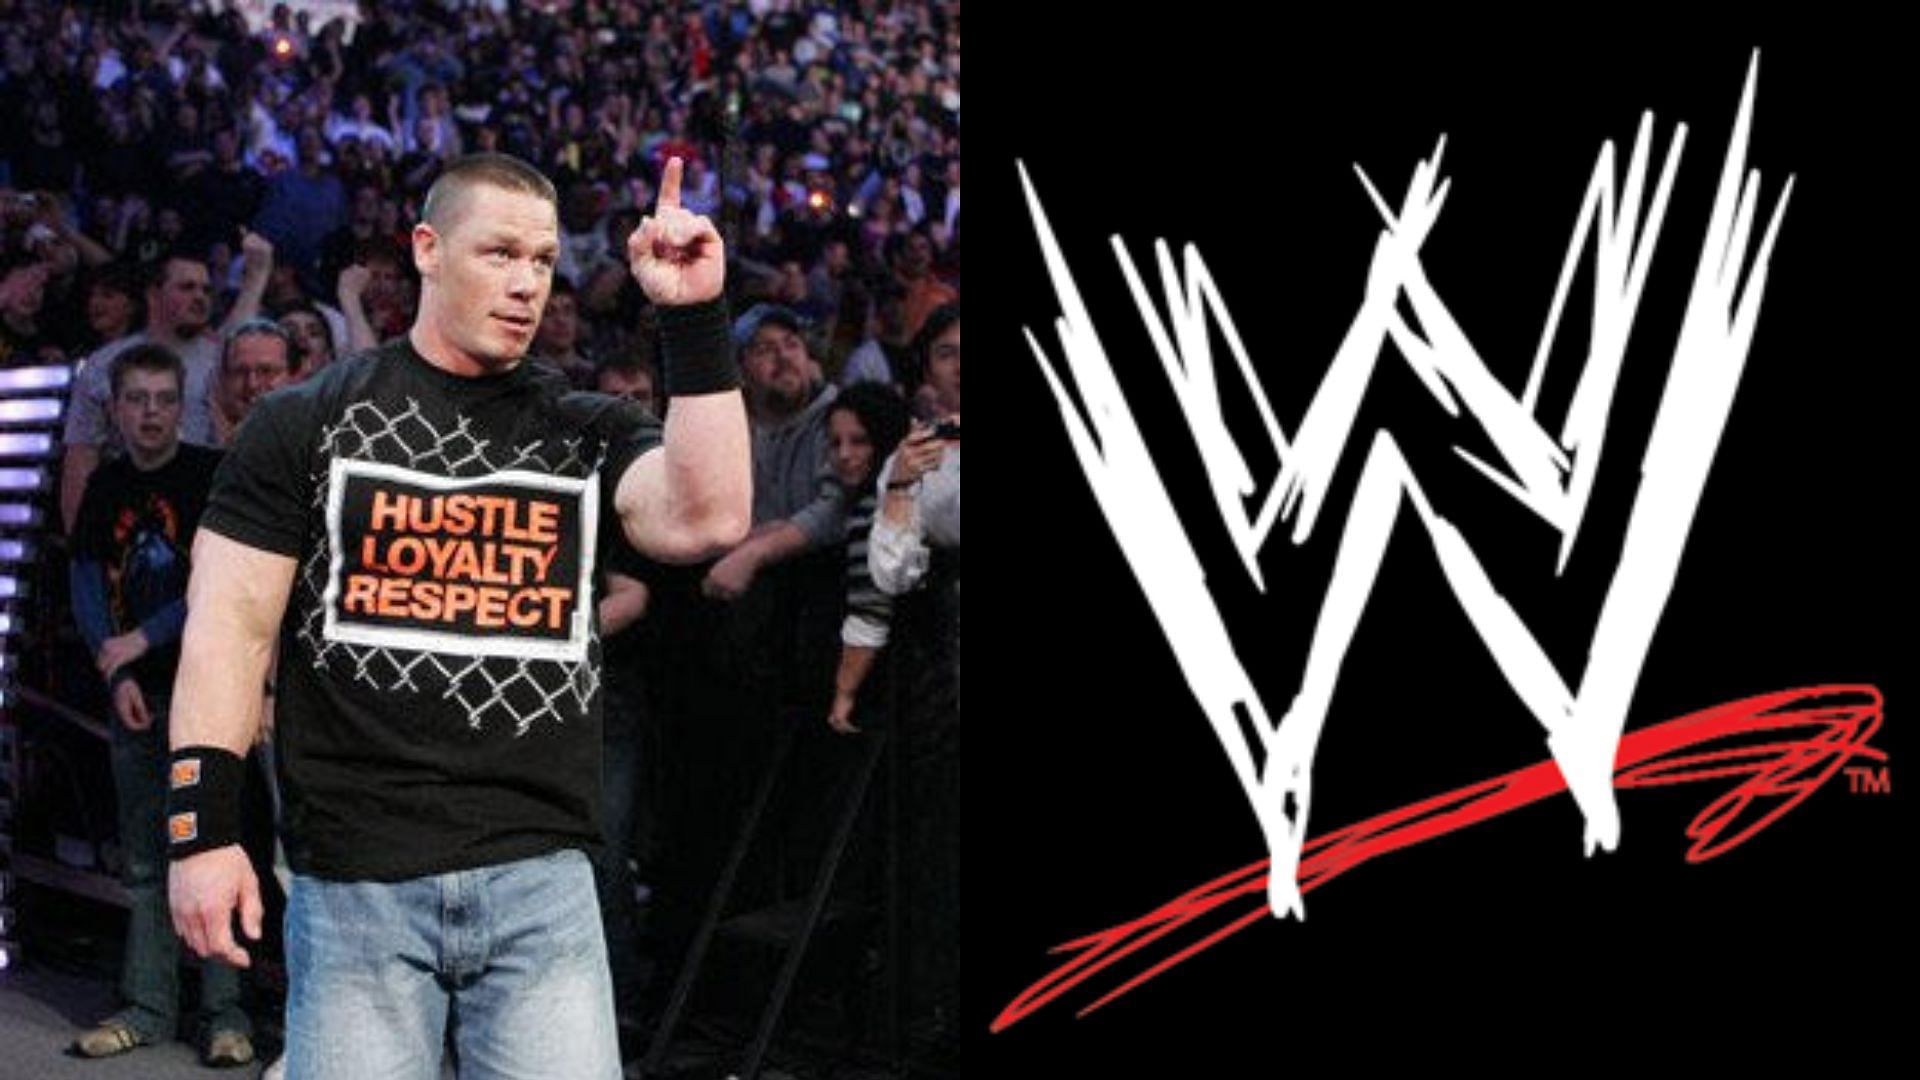 John Cena talked about the WWE superstar in an interview with Kayla Braxton